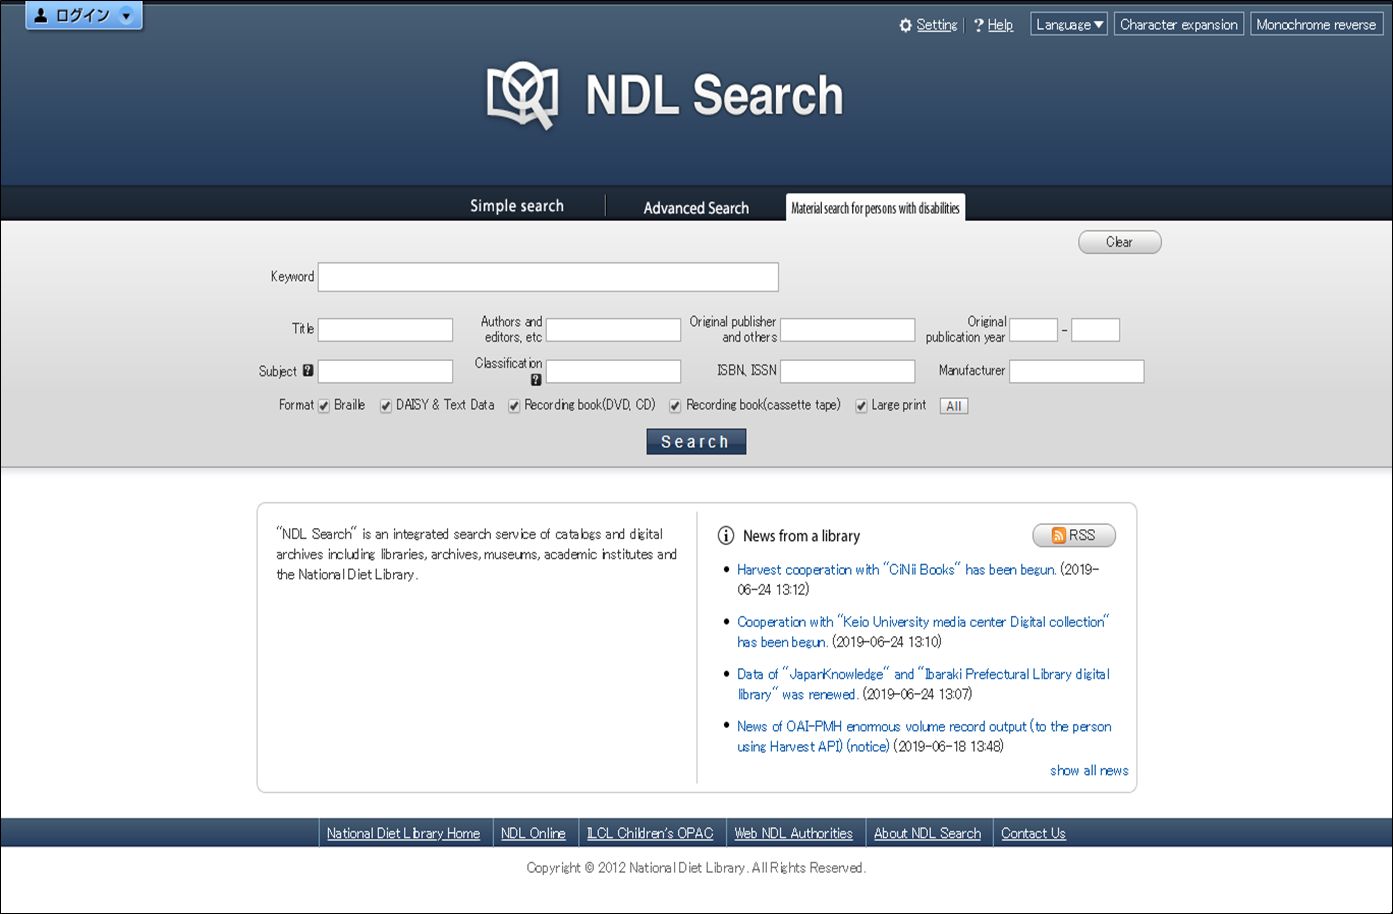 The top page of the Material Search for Persons with Disabilities (NDL Search)